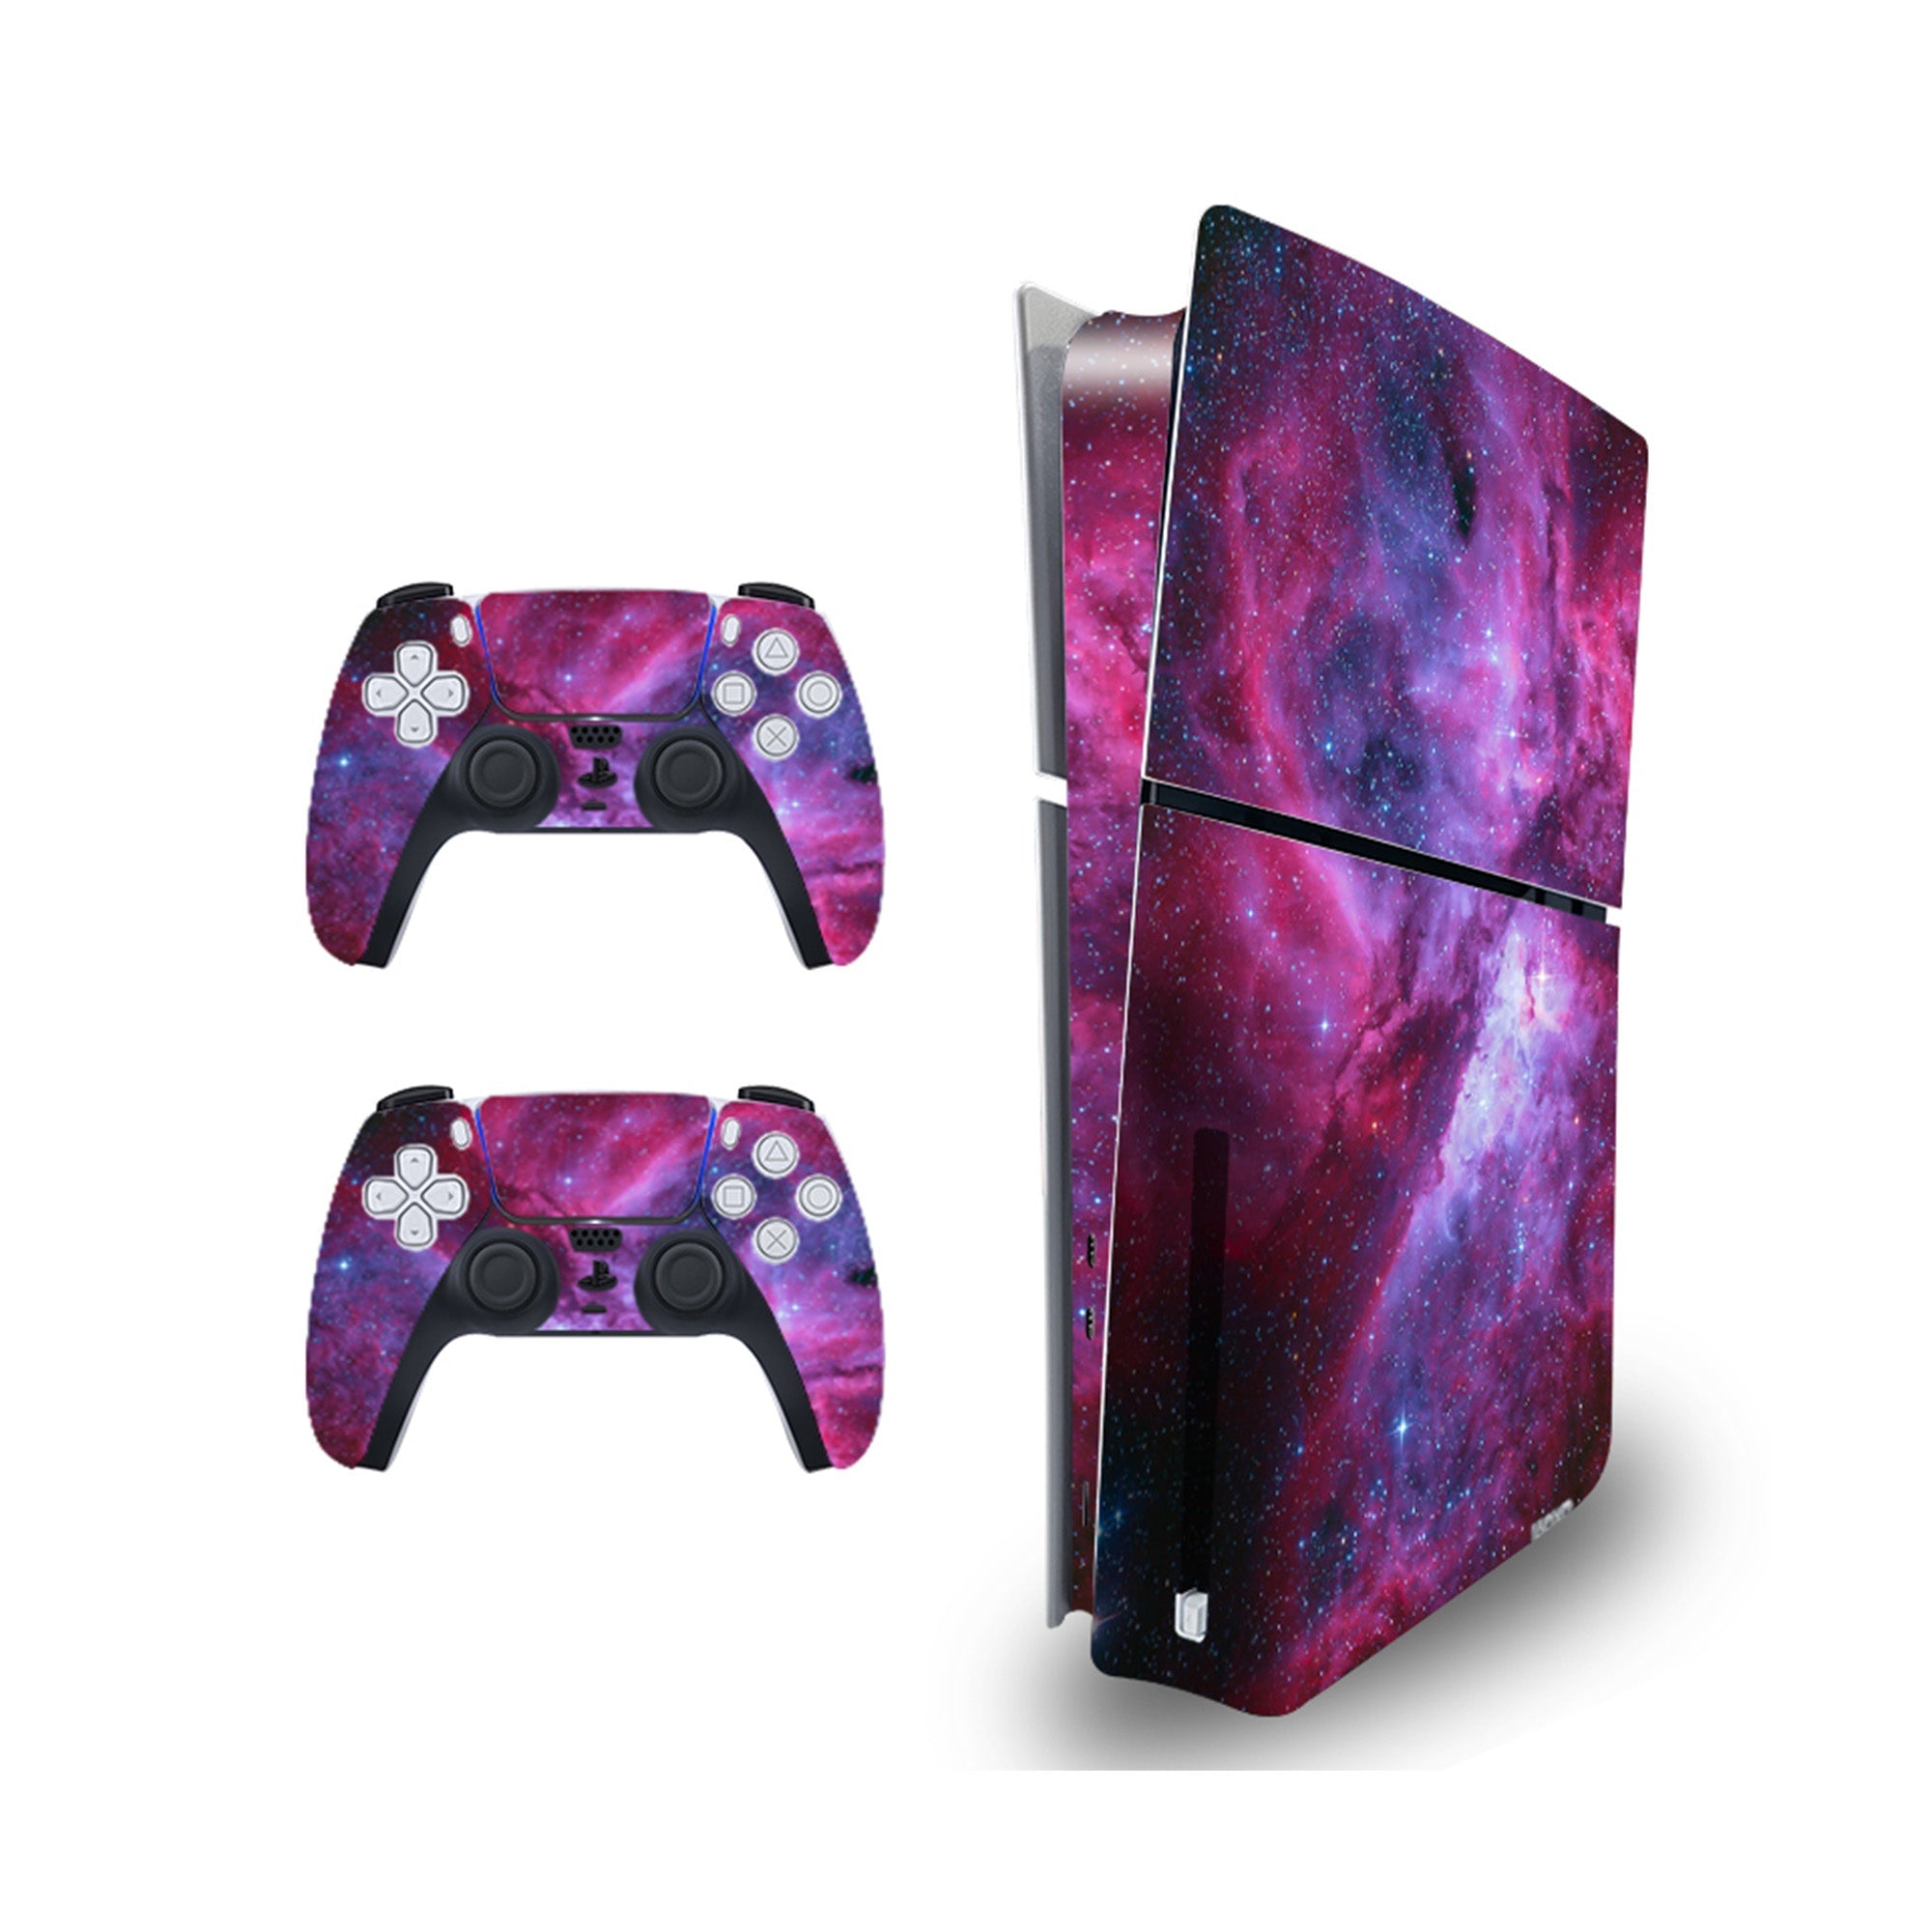 Mytrix Whole Body Protective Skin for PlayStation 5 Slim Disc Console, Durable Vinyl Decal Easy Apply Style Wrap Stickers for PS5 Slim Disc Version - Cosmic Galaxy